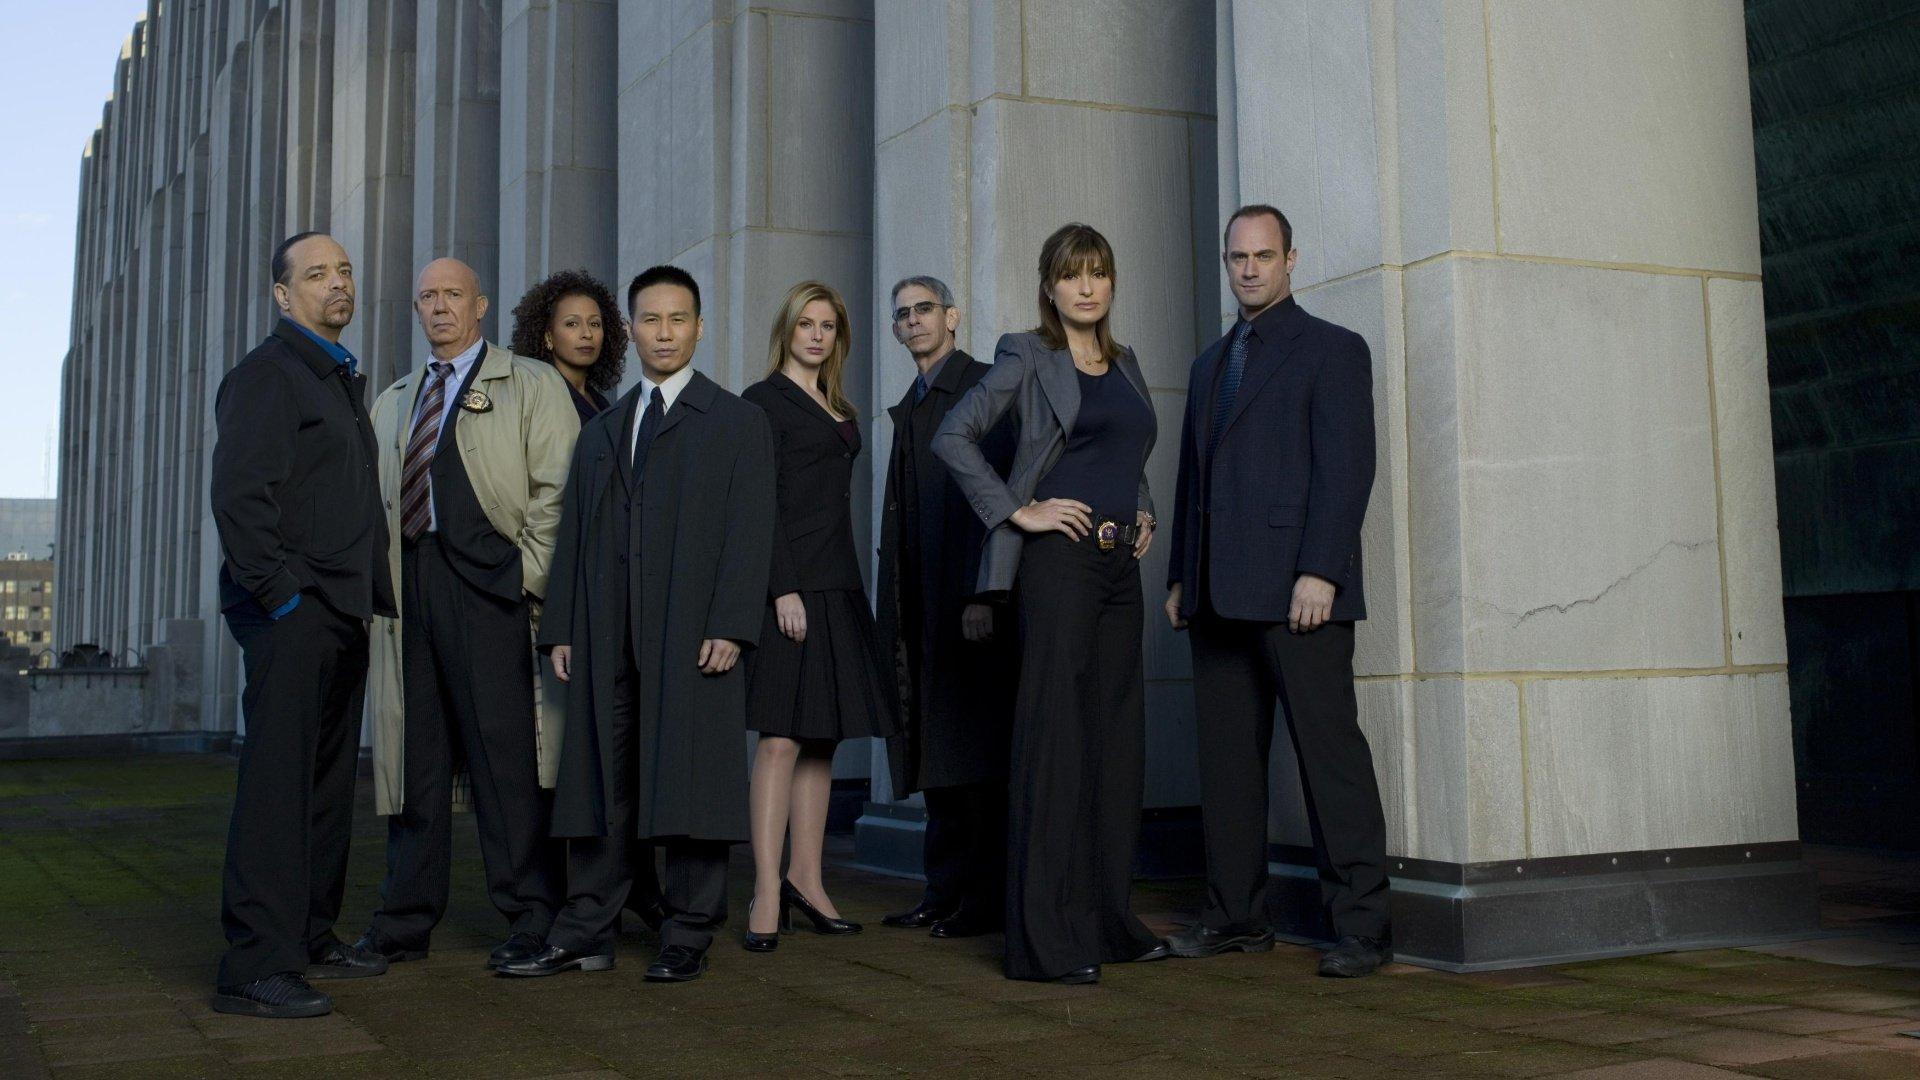 Law & Order: Special Victims Unit HD Wallpaper. Background Image